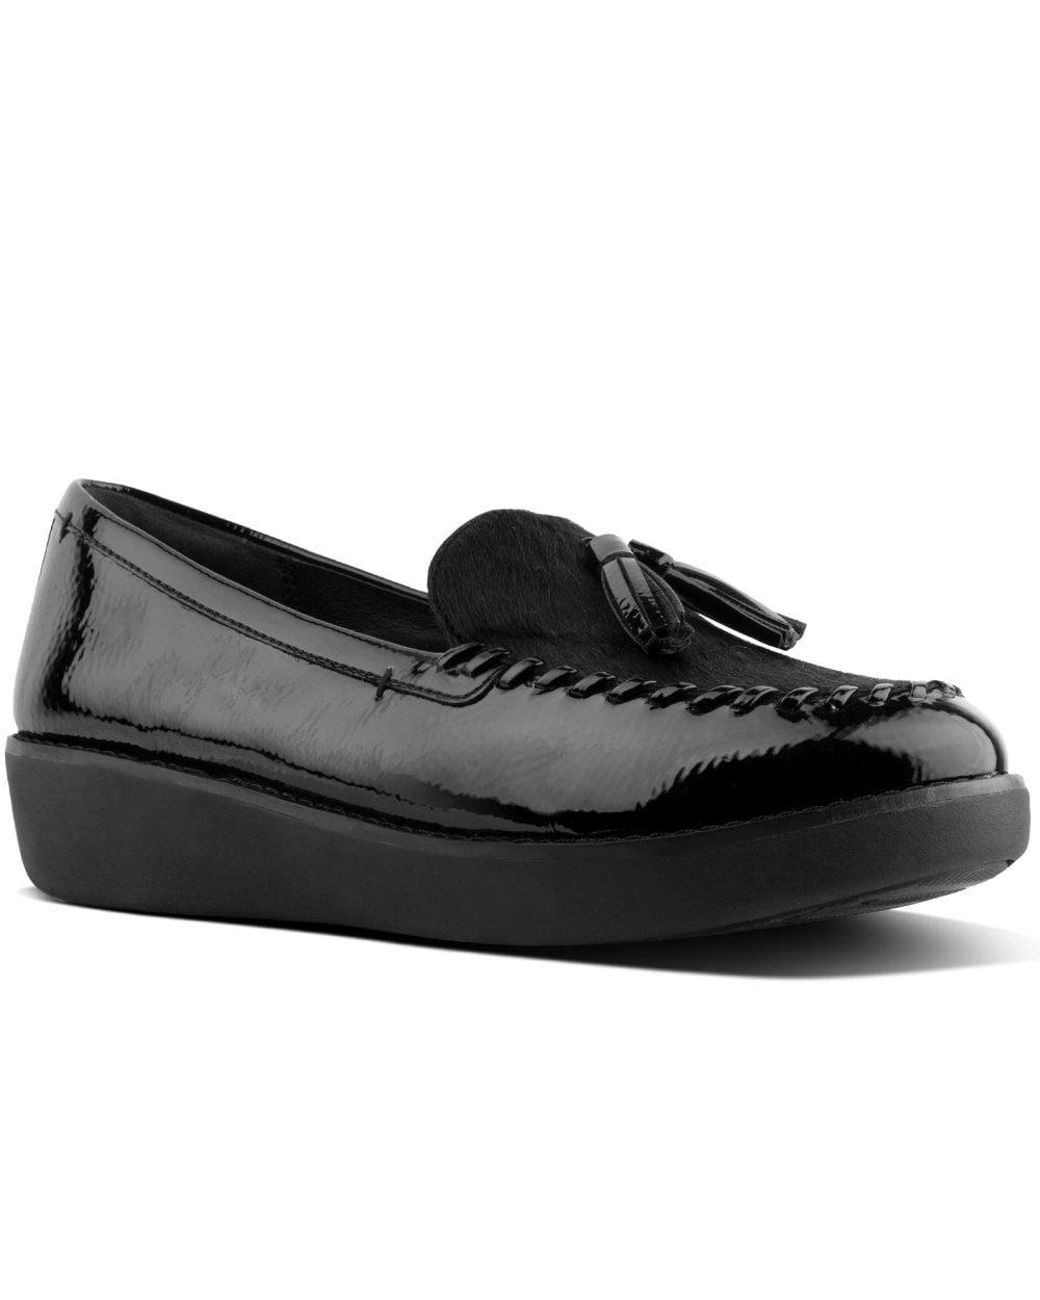 petrina patent moccasin loafers